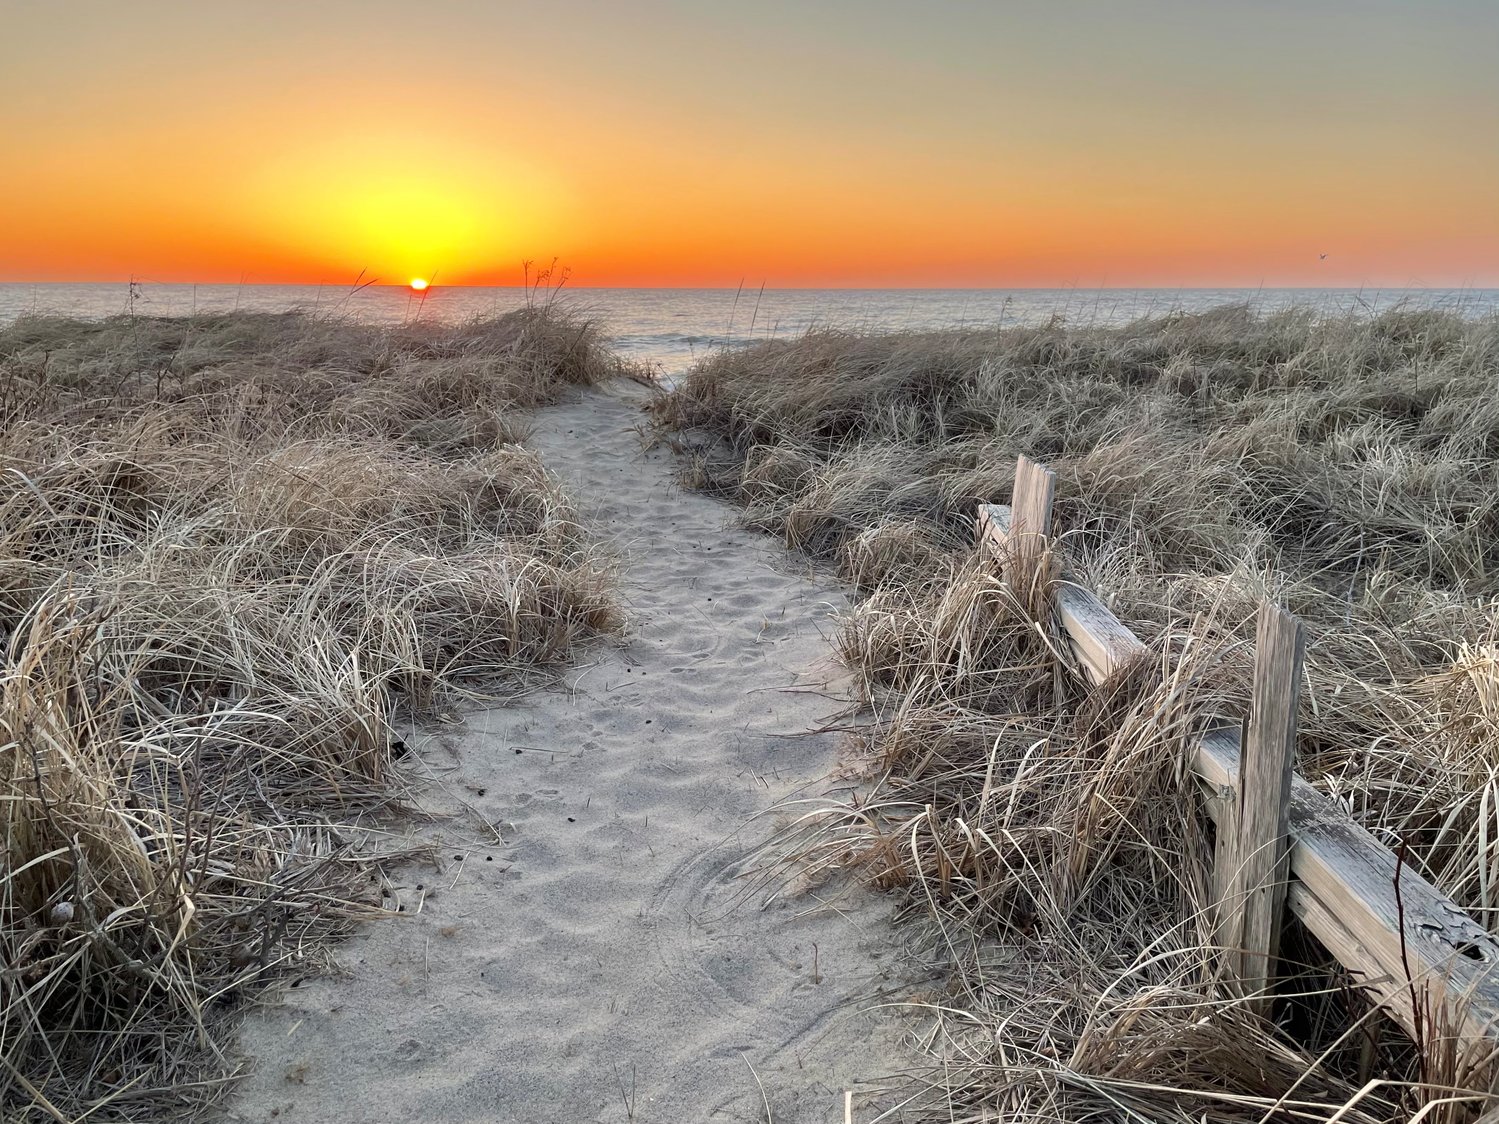 The first sunrise of spring at Sconset Beach.